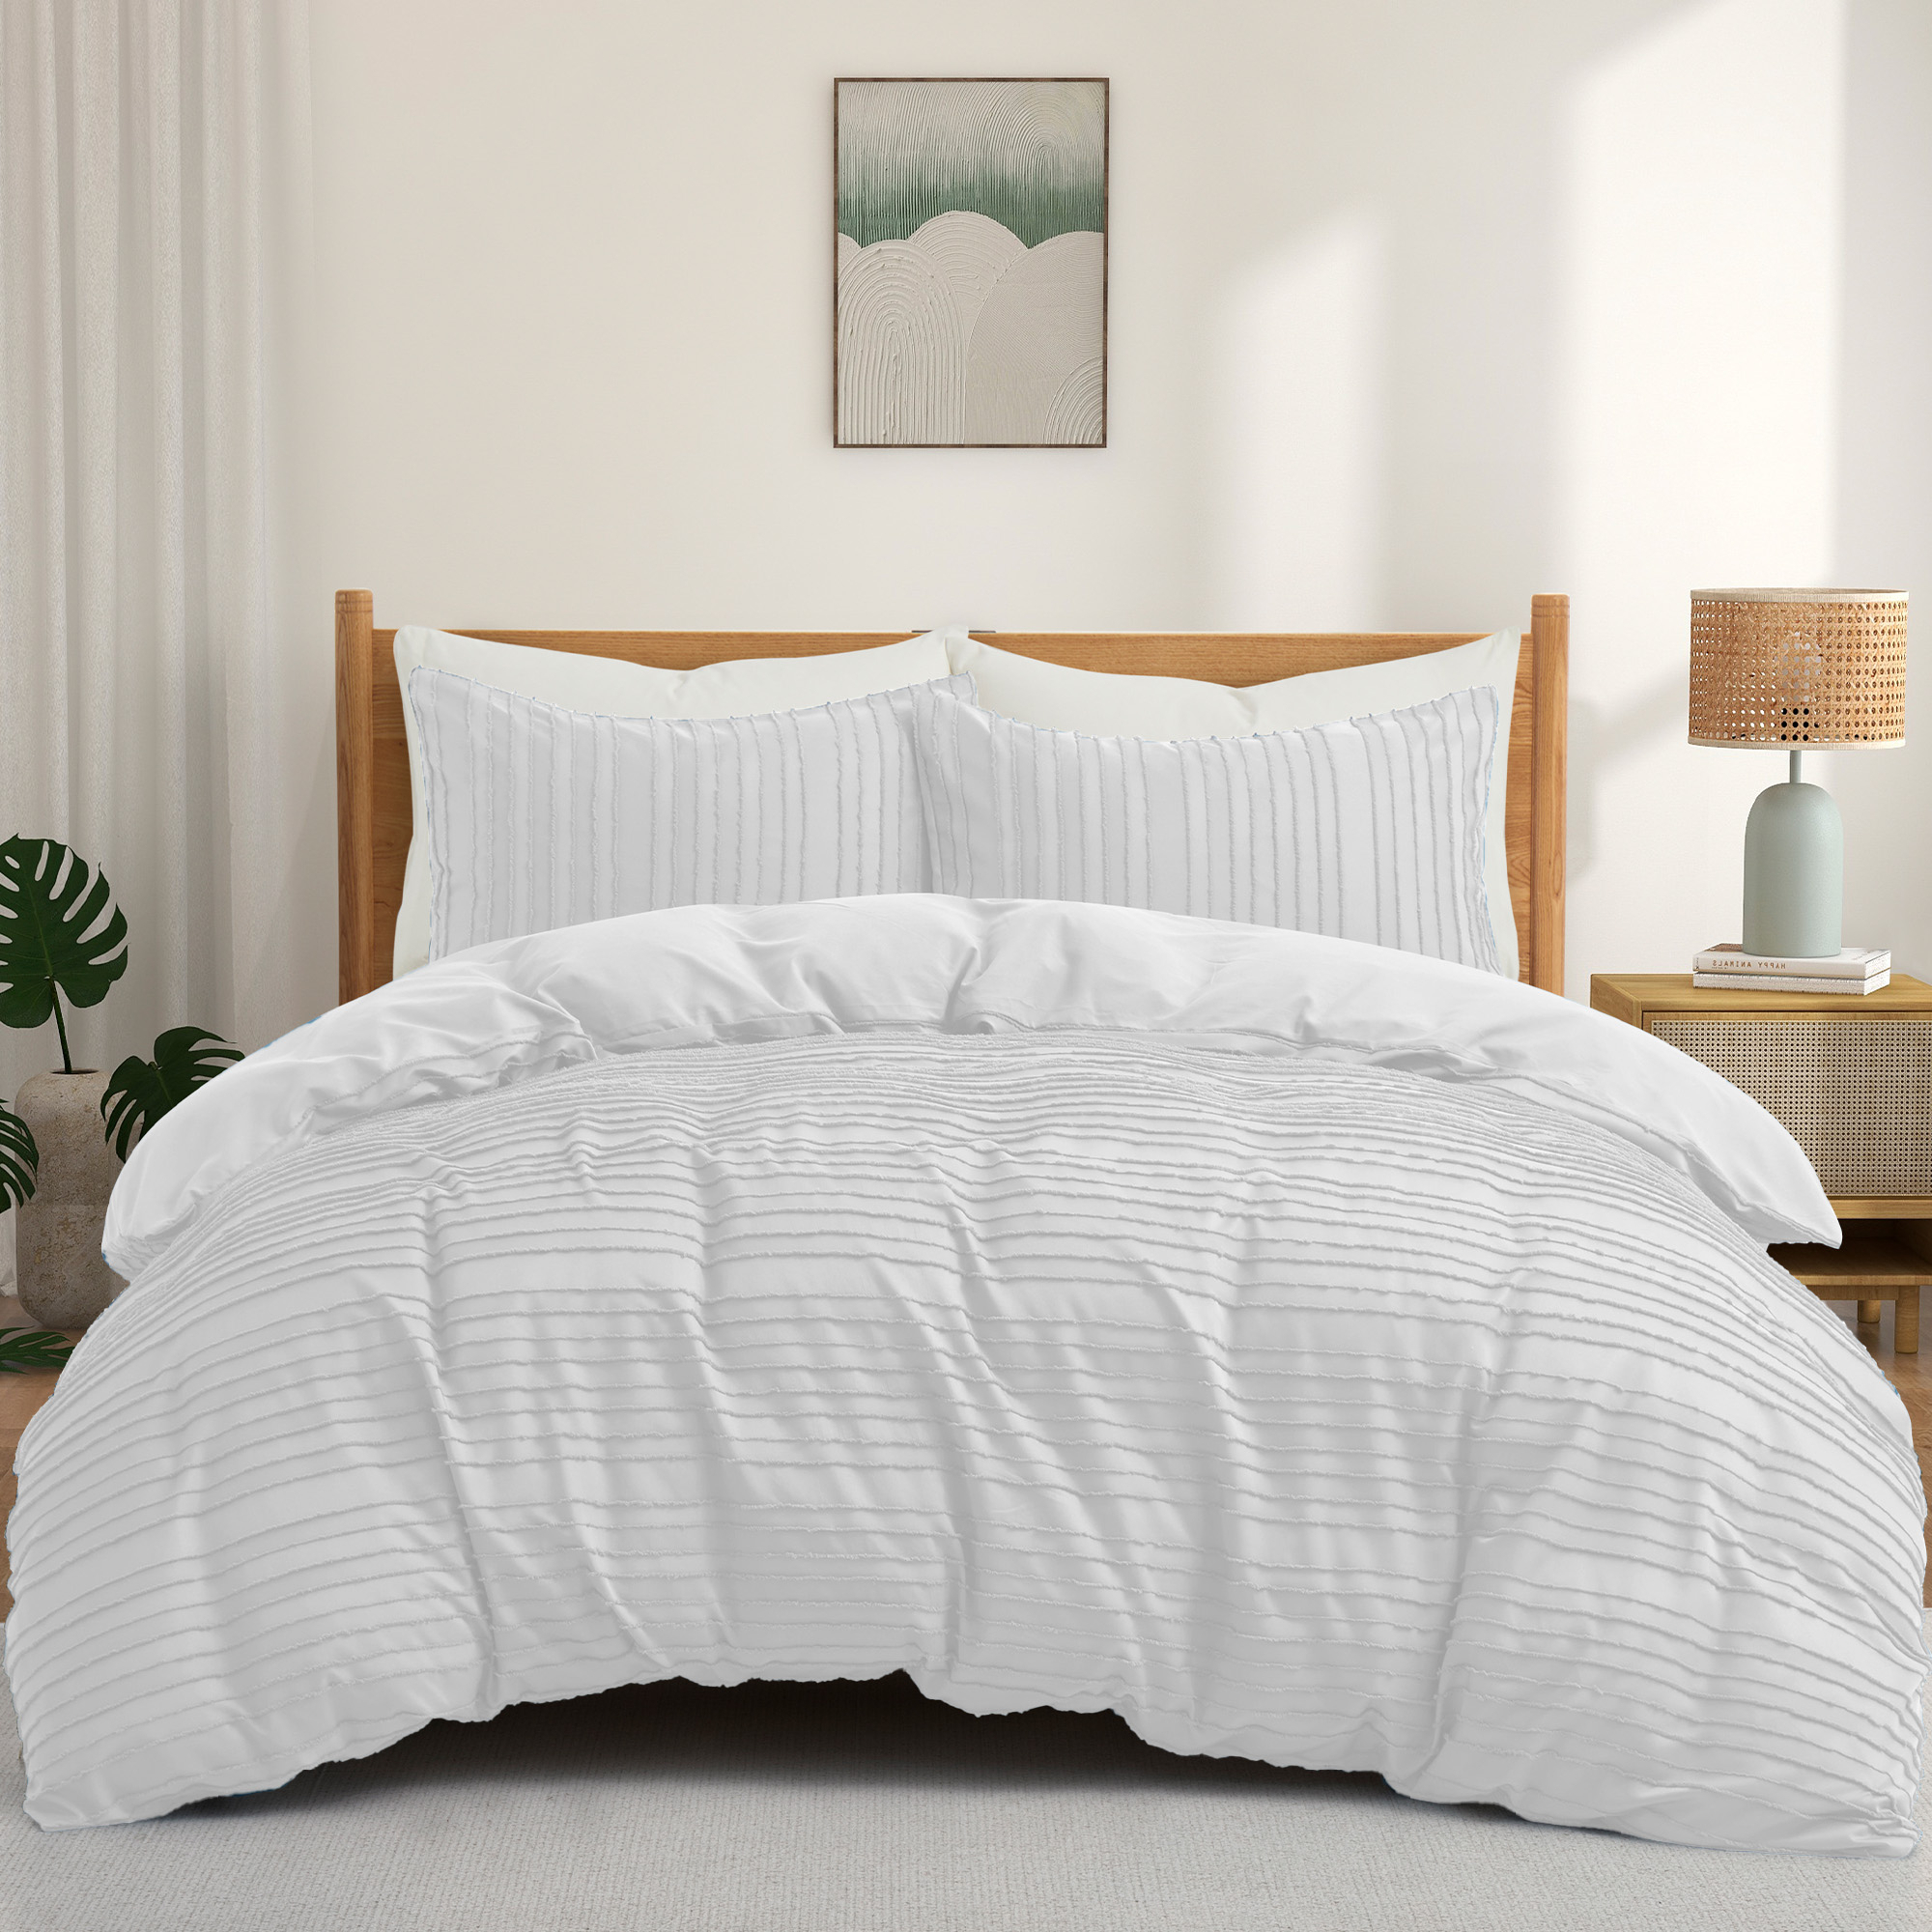 3 Piece Duvet Cover Set With Shams, Luxury Bedding Soft Microfiber - White, Twin